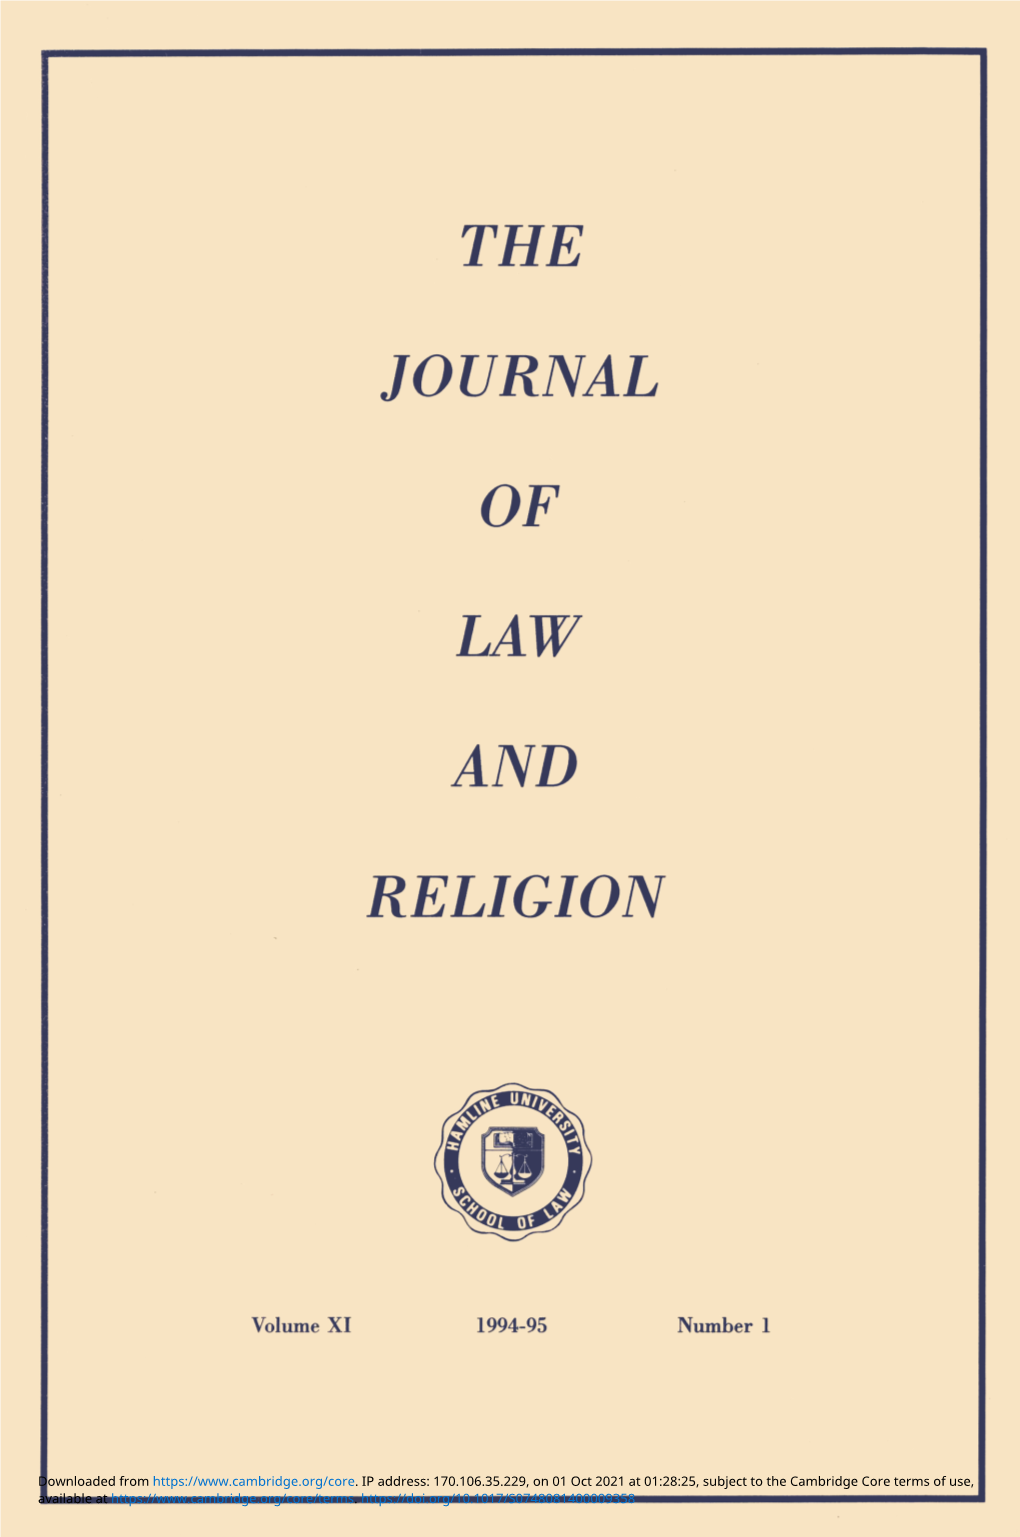 The Journal of Law and Religion